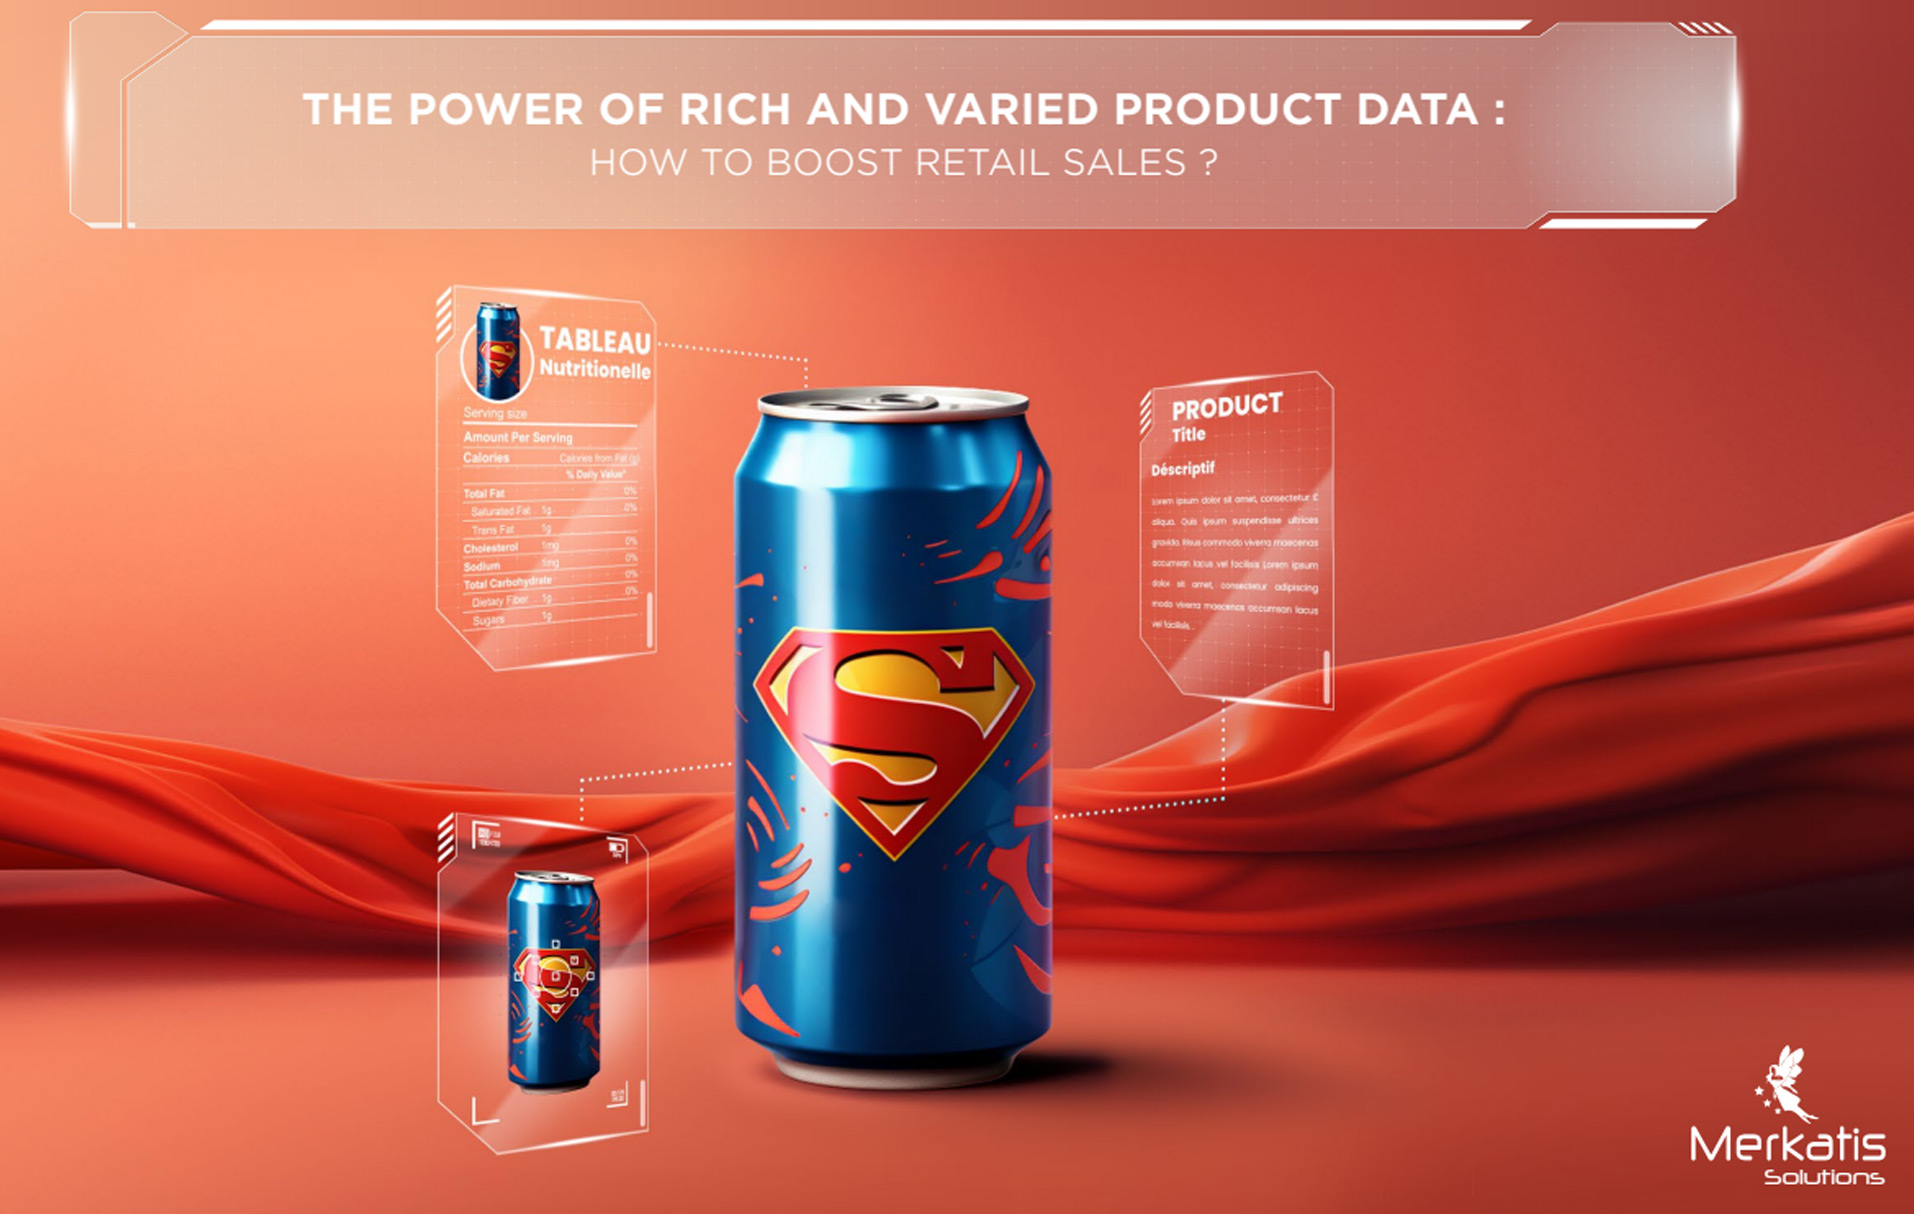 The Power of Rich and Diverse Product Data